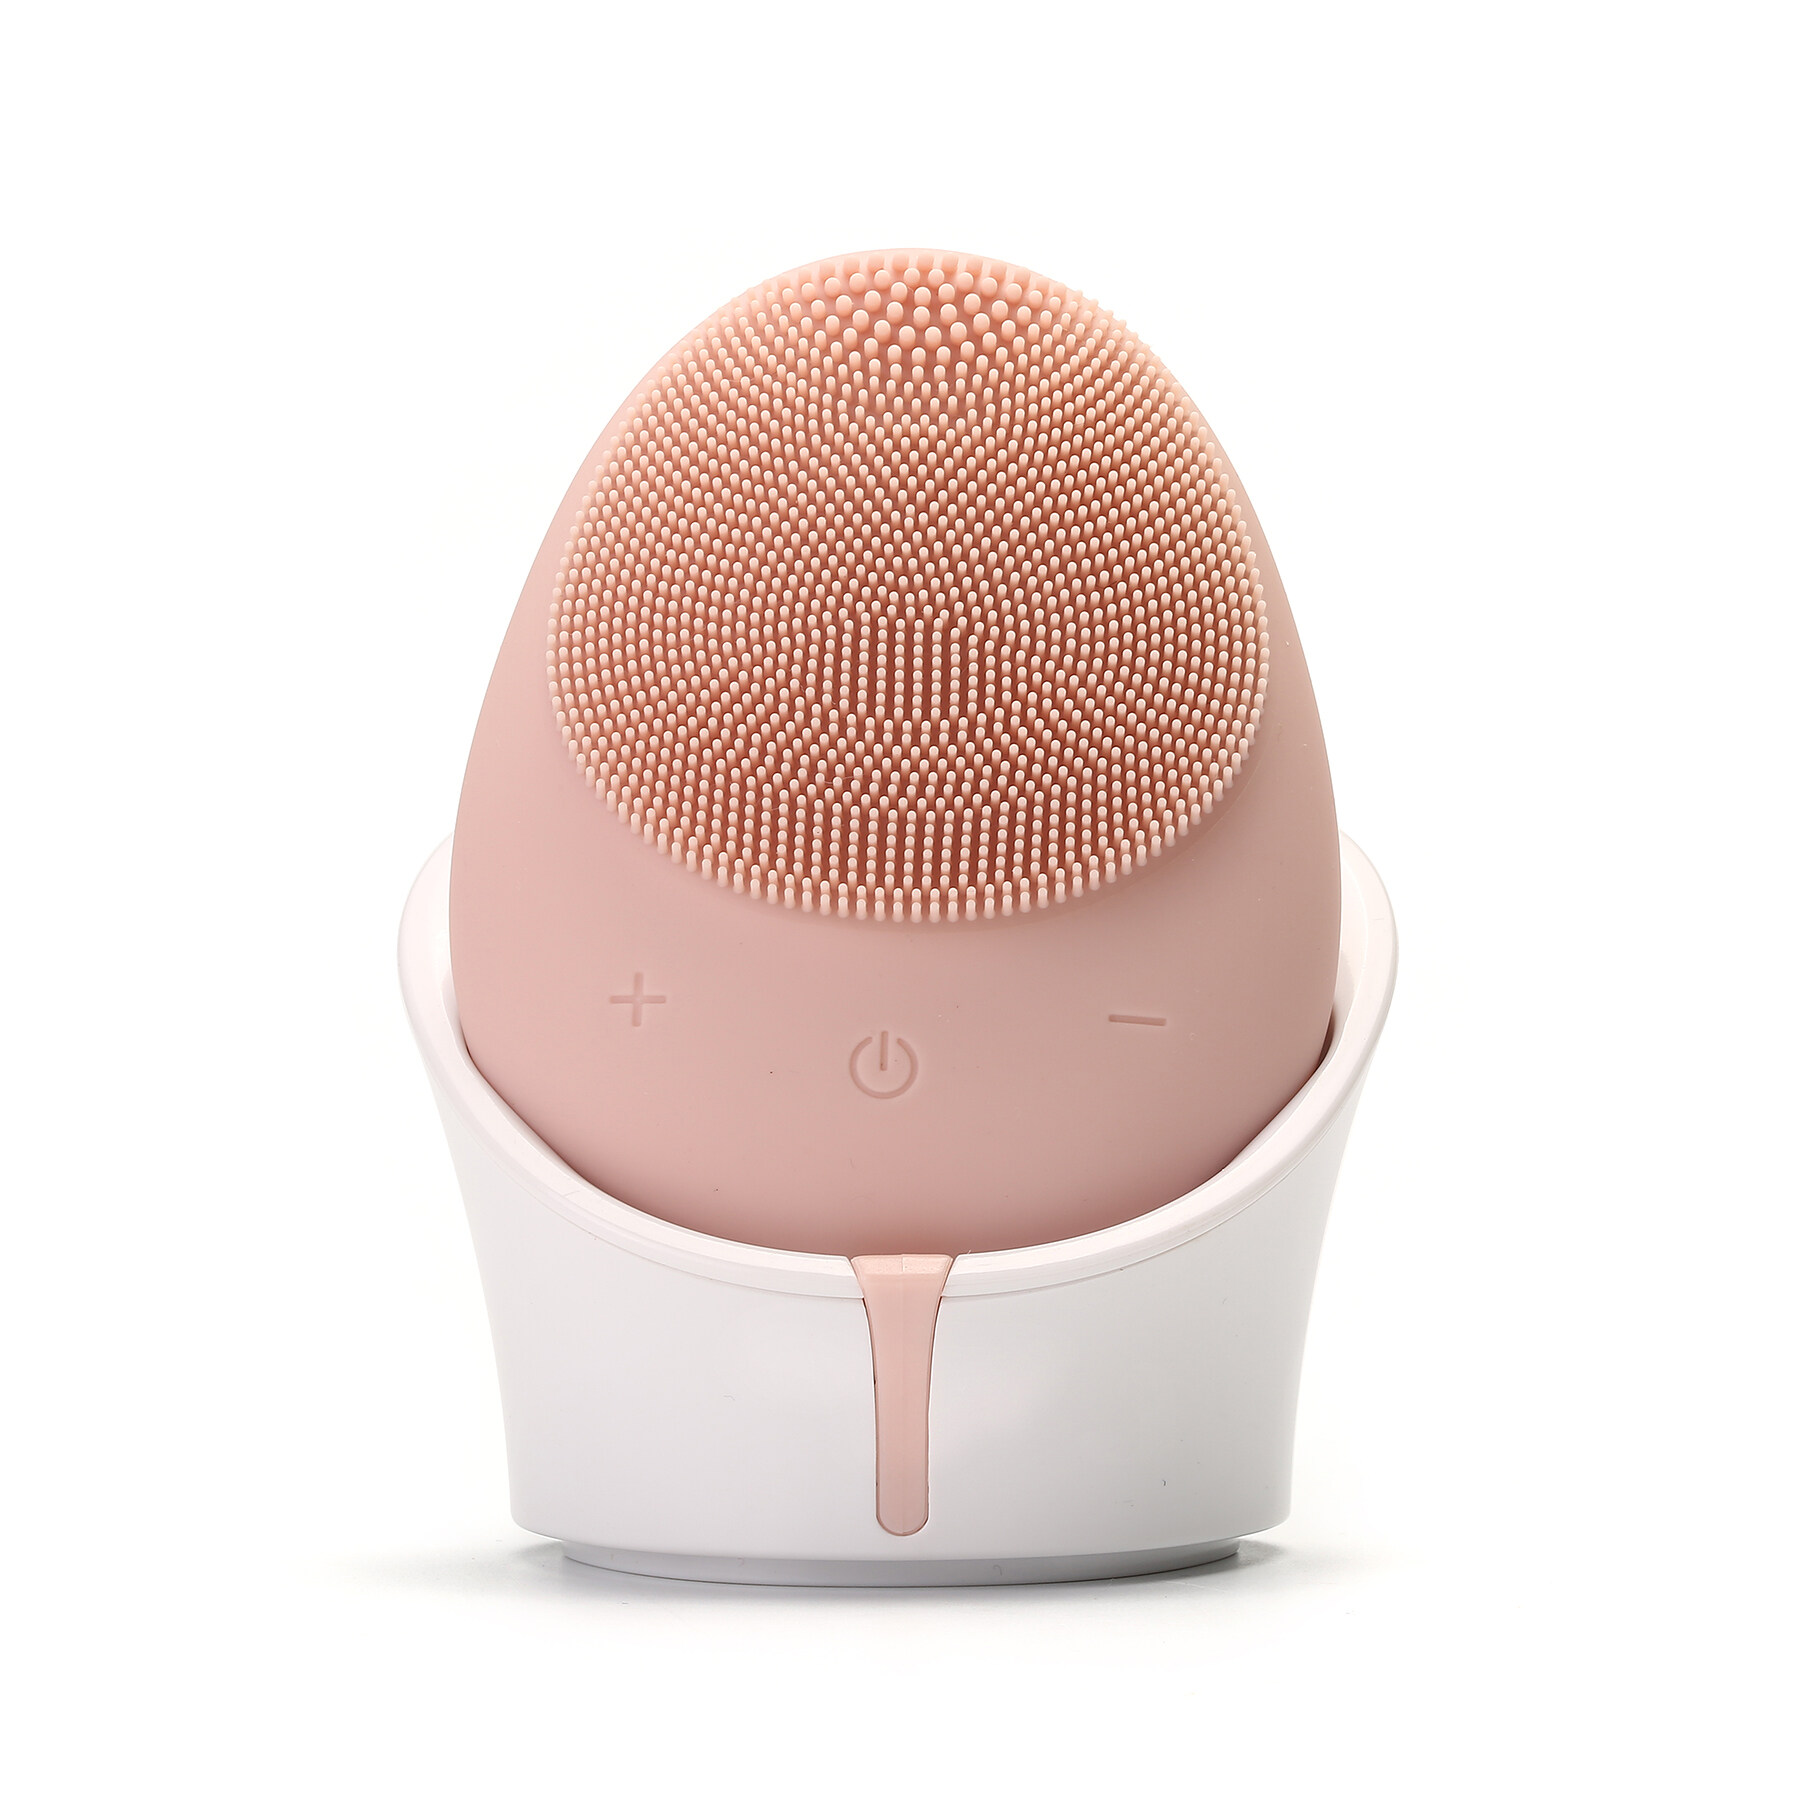 Updated Waterproof Vibrating Facial Cleansing Brush Mini Face Massager Cleanser Silicone Electric Ultrasonic Facial Brush